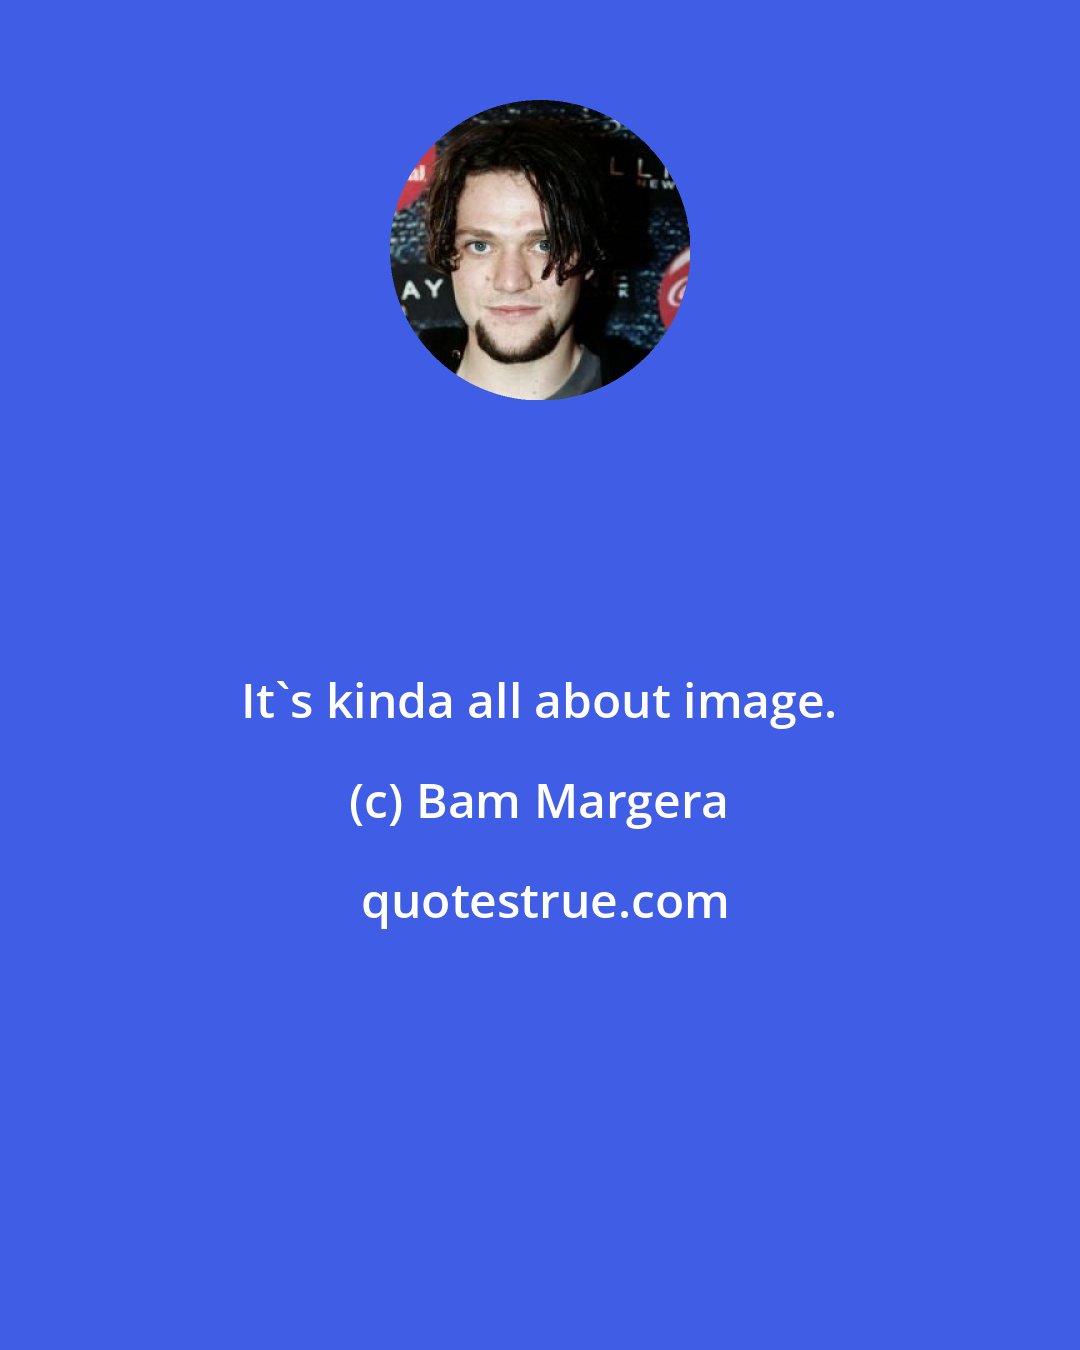 Bam Margera: It's kinda all about image.